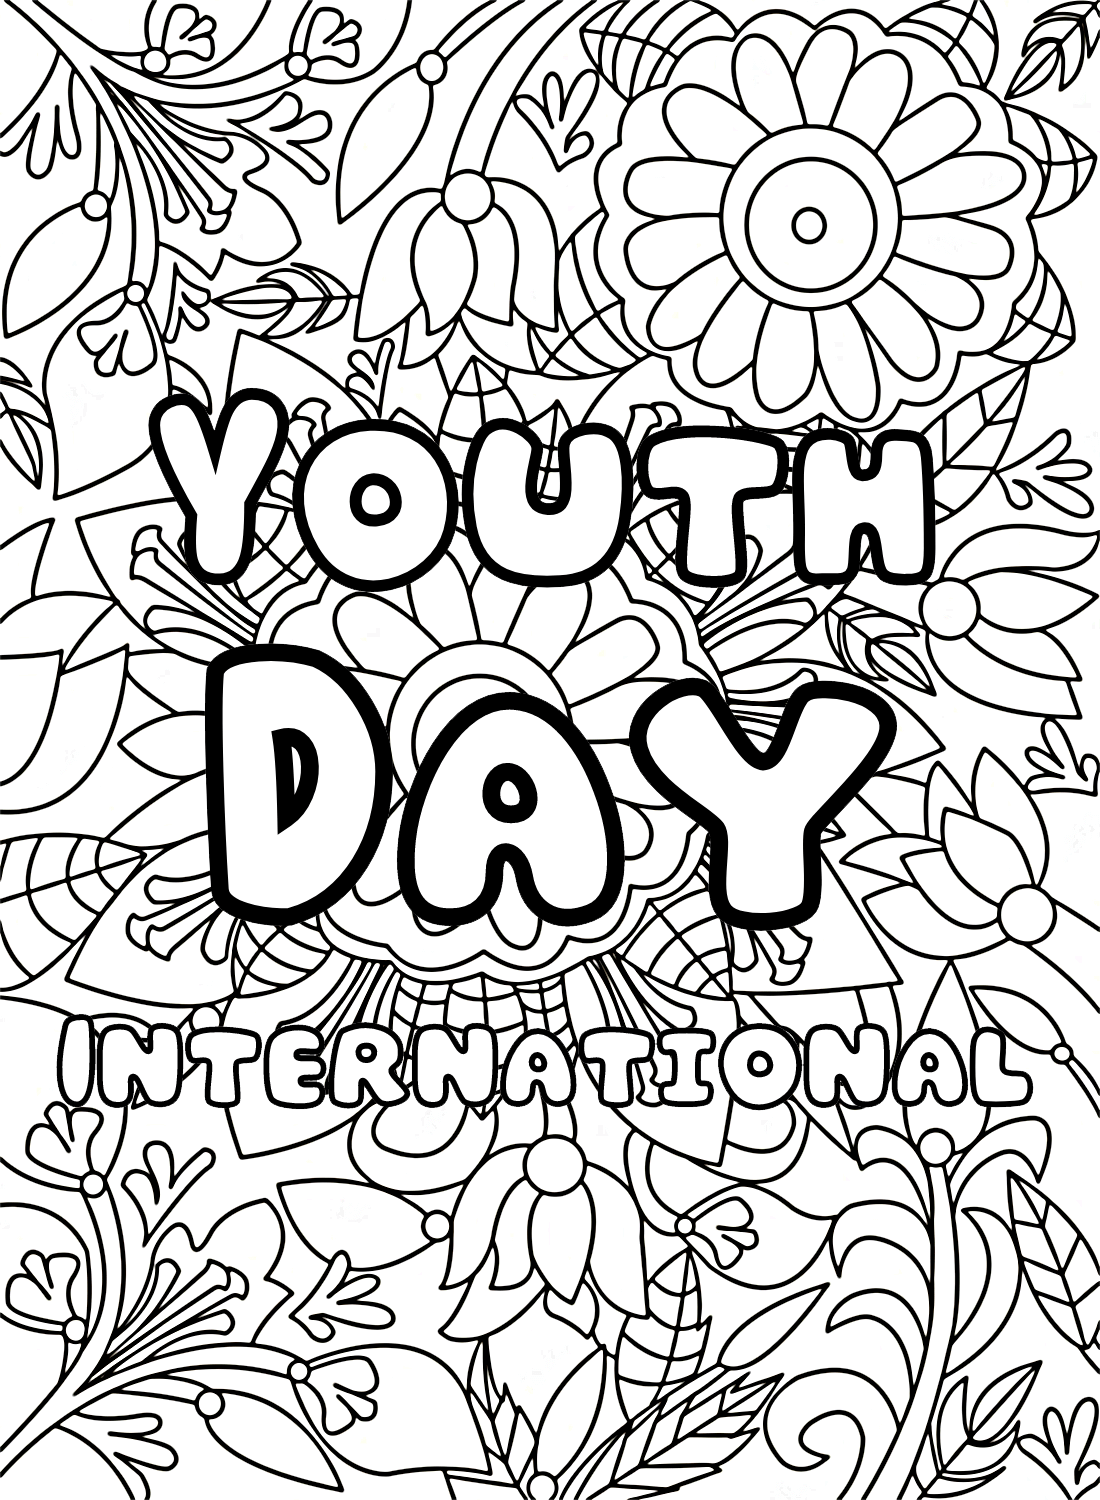 International Youth Day to Color from International Youth Day